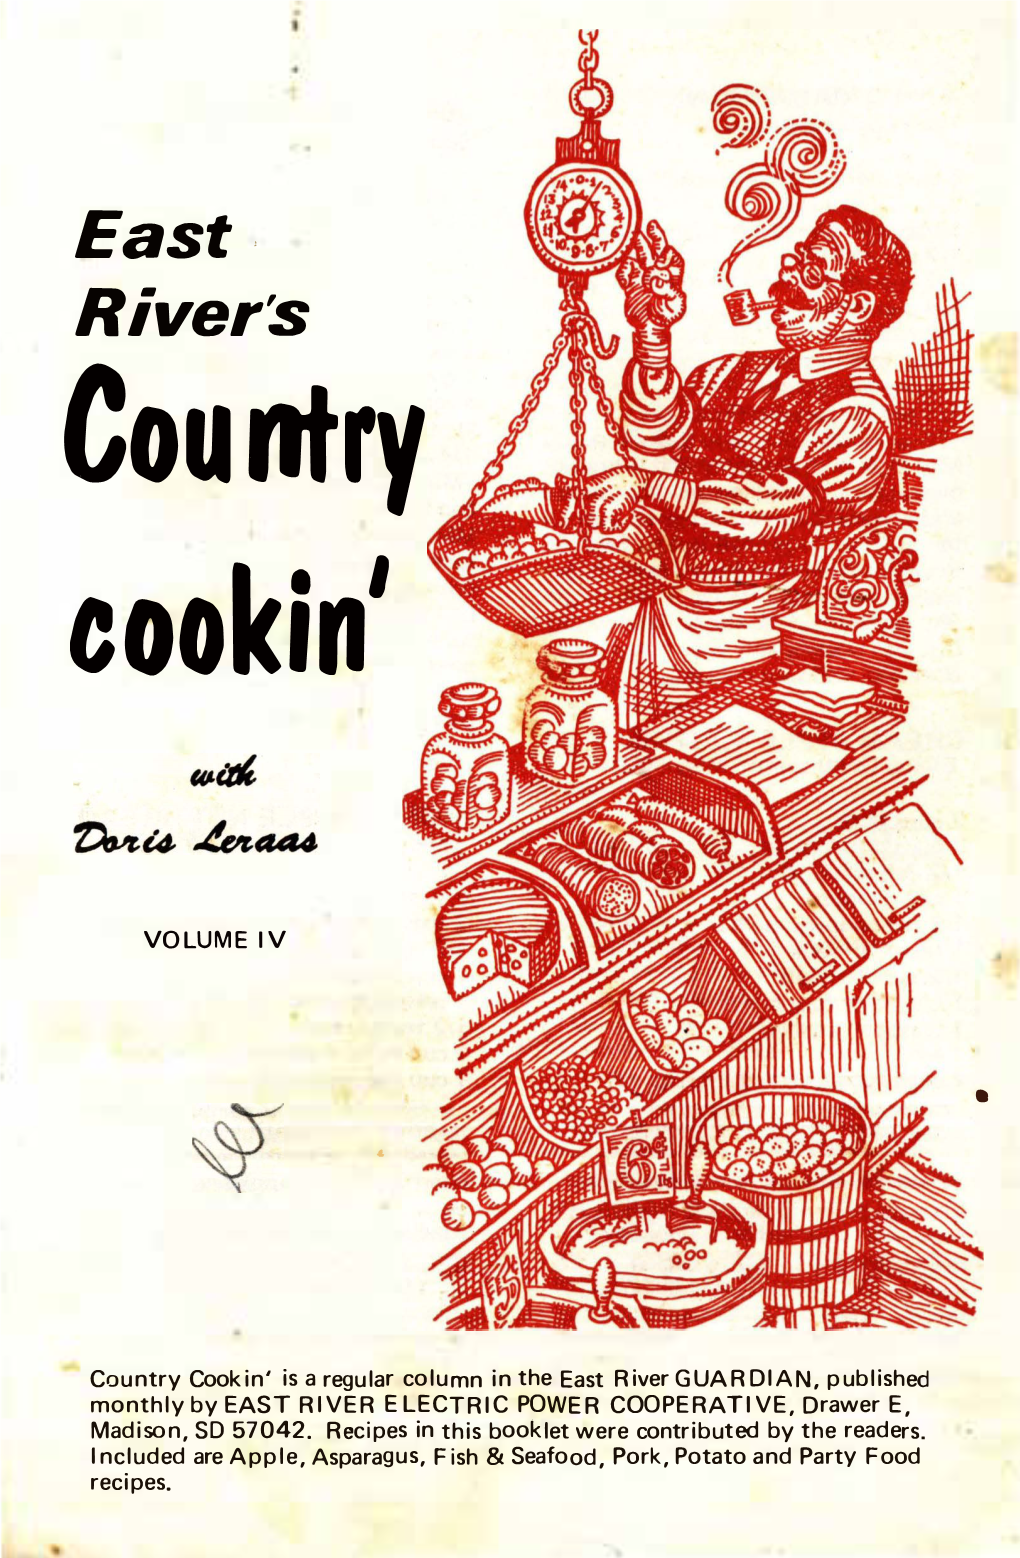 East River's Country Cookin' with Doris Leraas, Volume IV